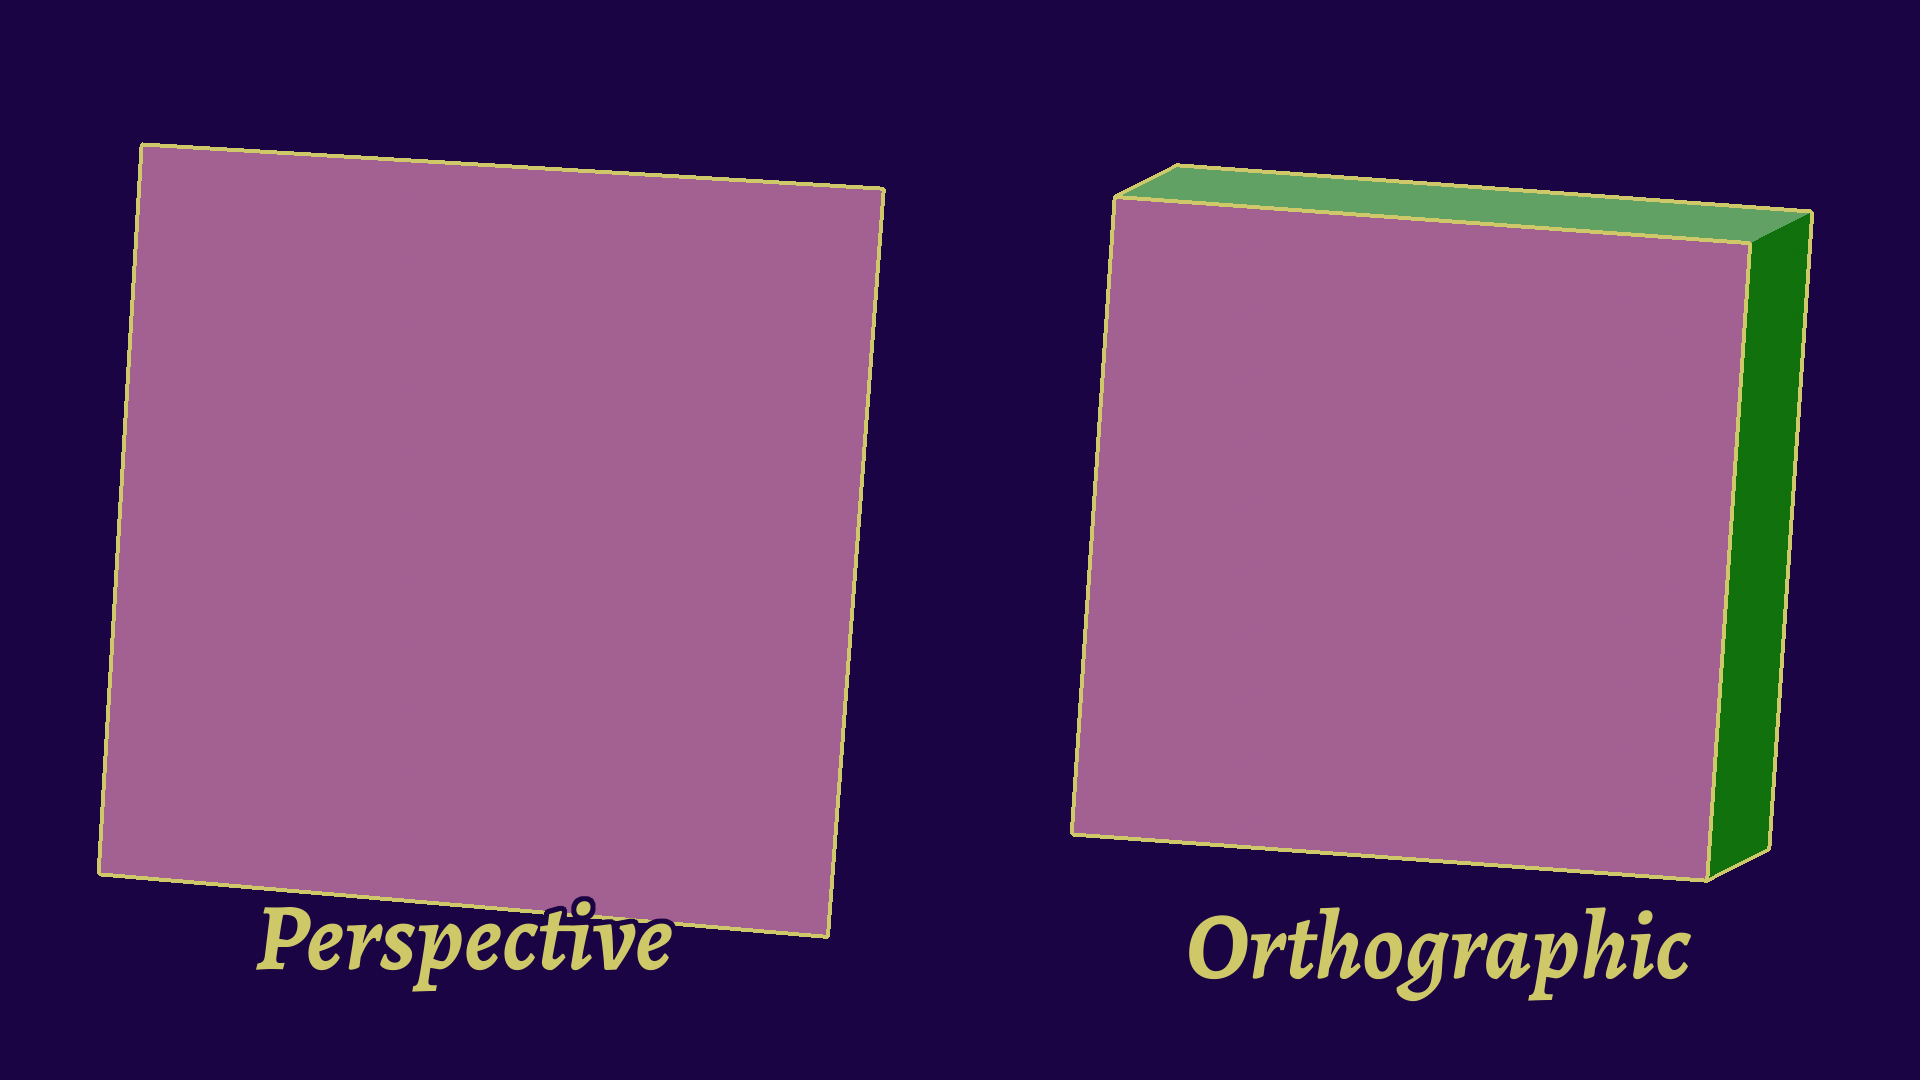 Orthographic vs Perspective